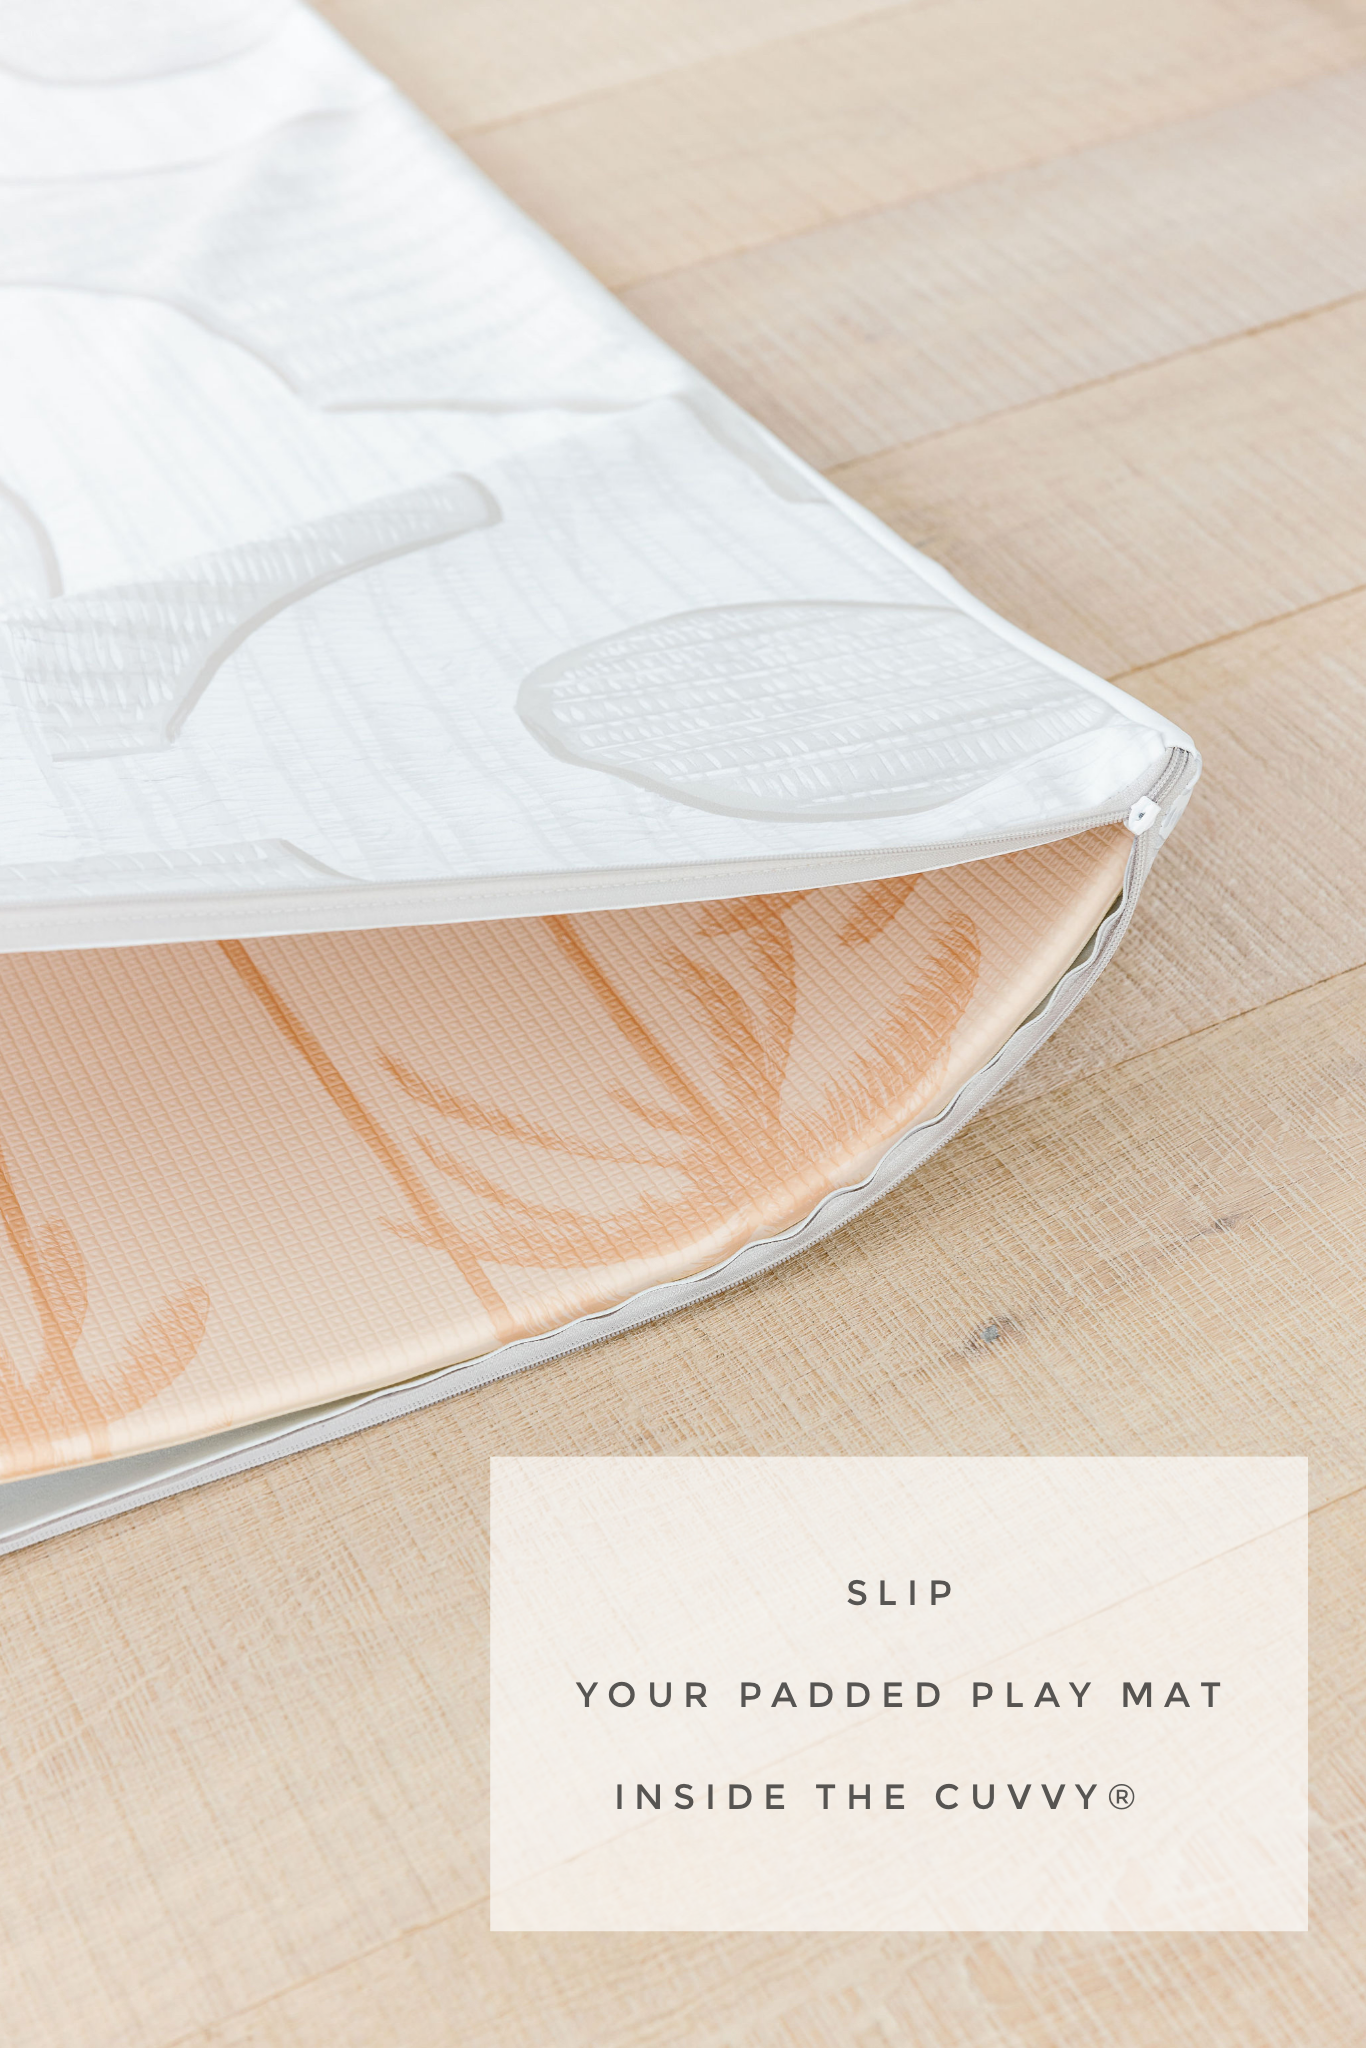 Softly Summer Cuvvy play mat cover, padded play mat, vegan leather, reversible, palm tree play mat, baby play mat